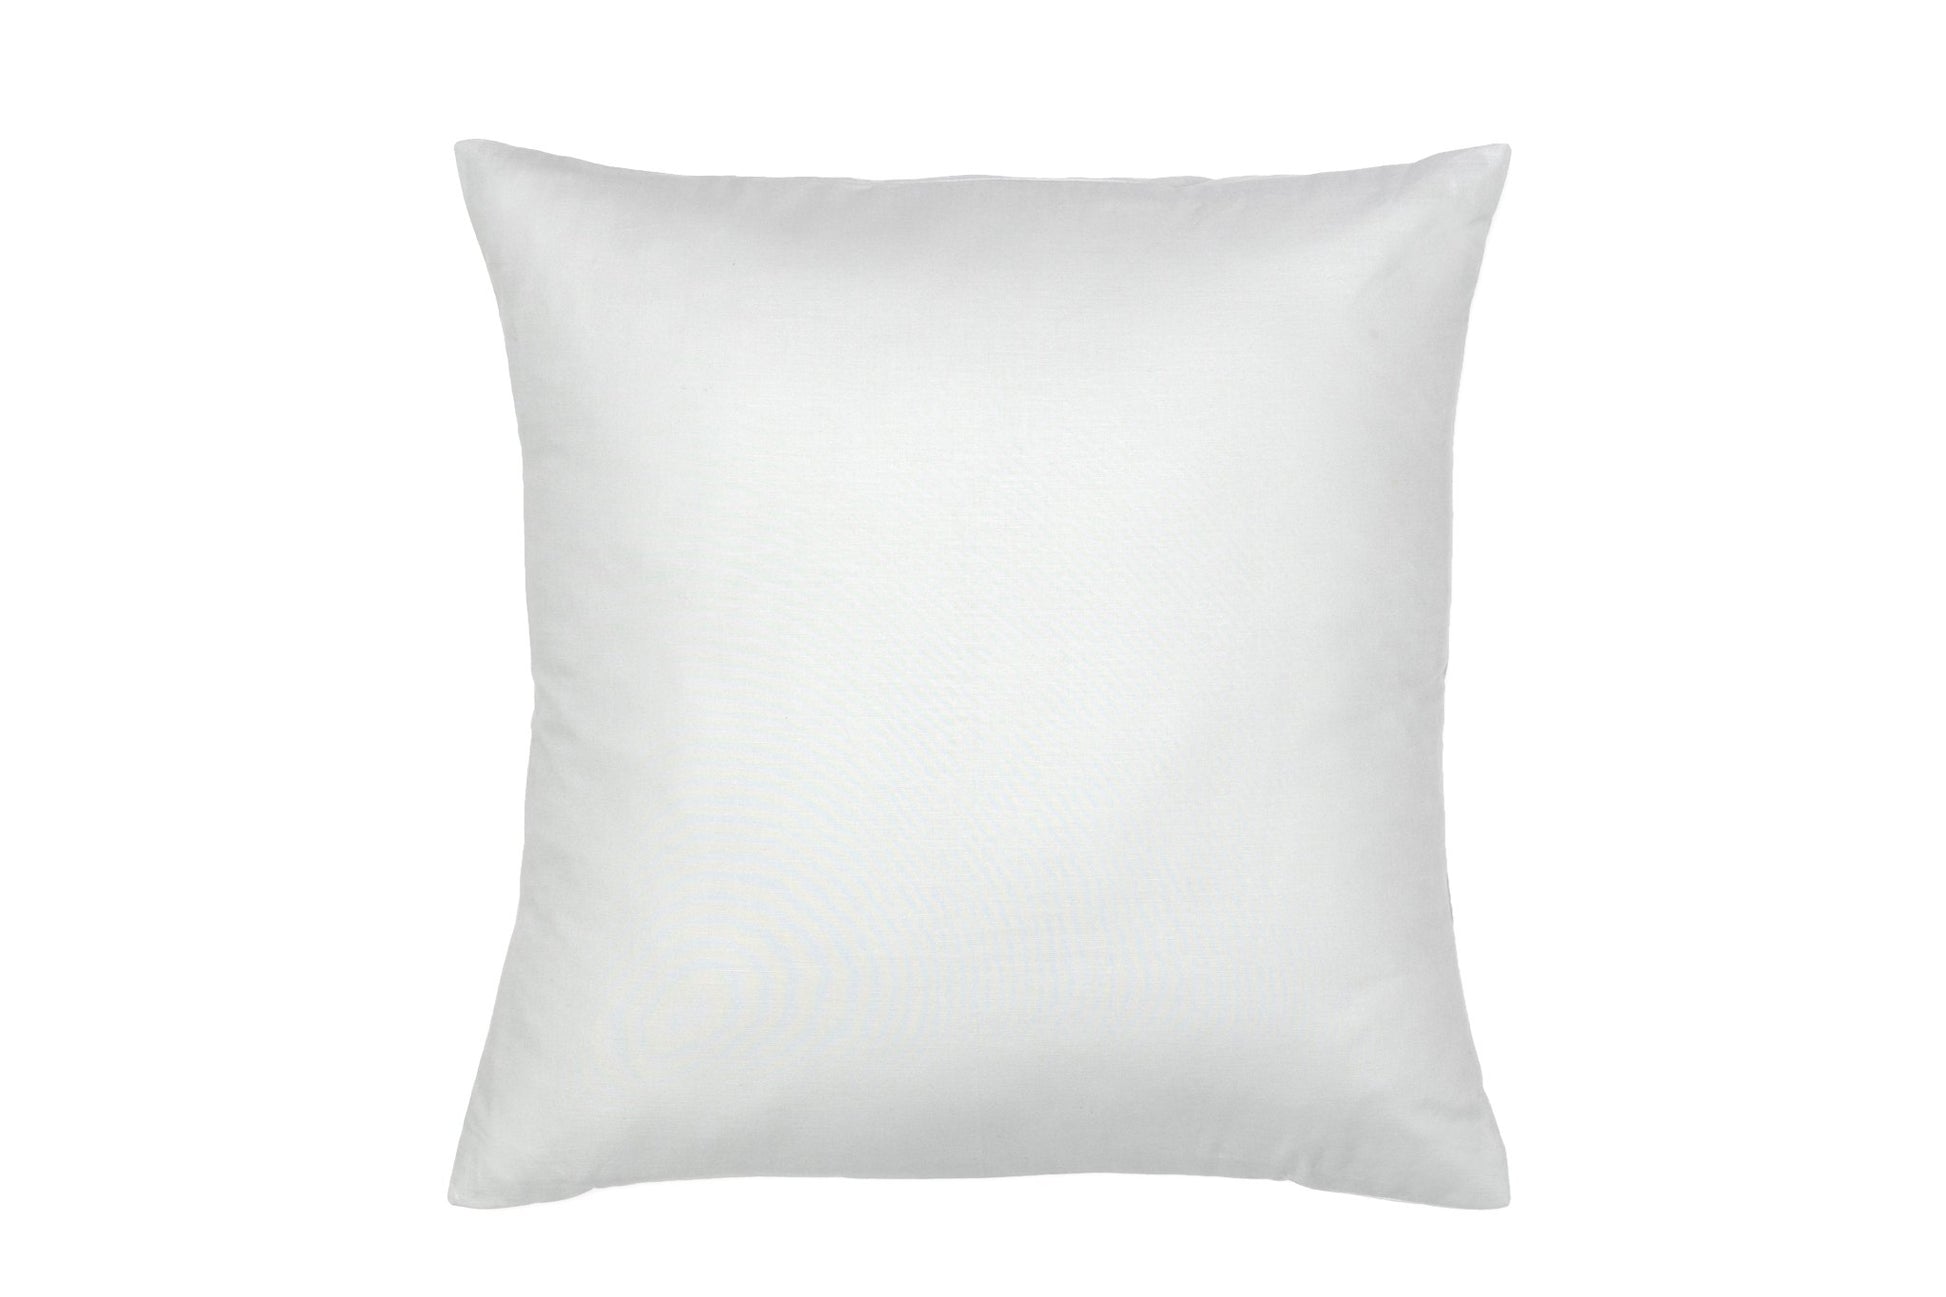 Solid Silver Gray Throw Pillow - New Arrivals Inc